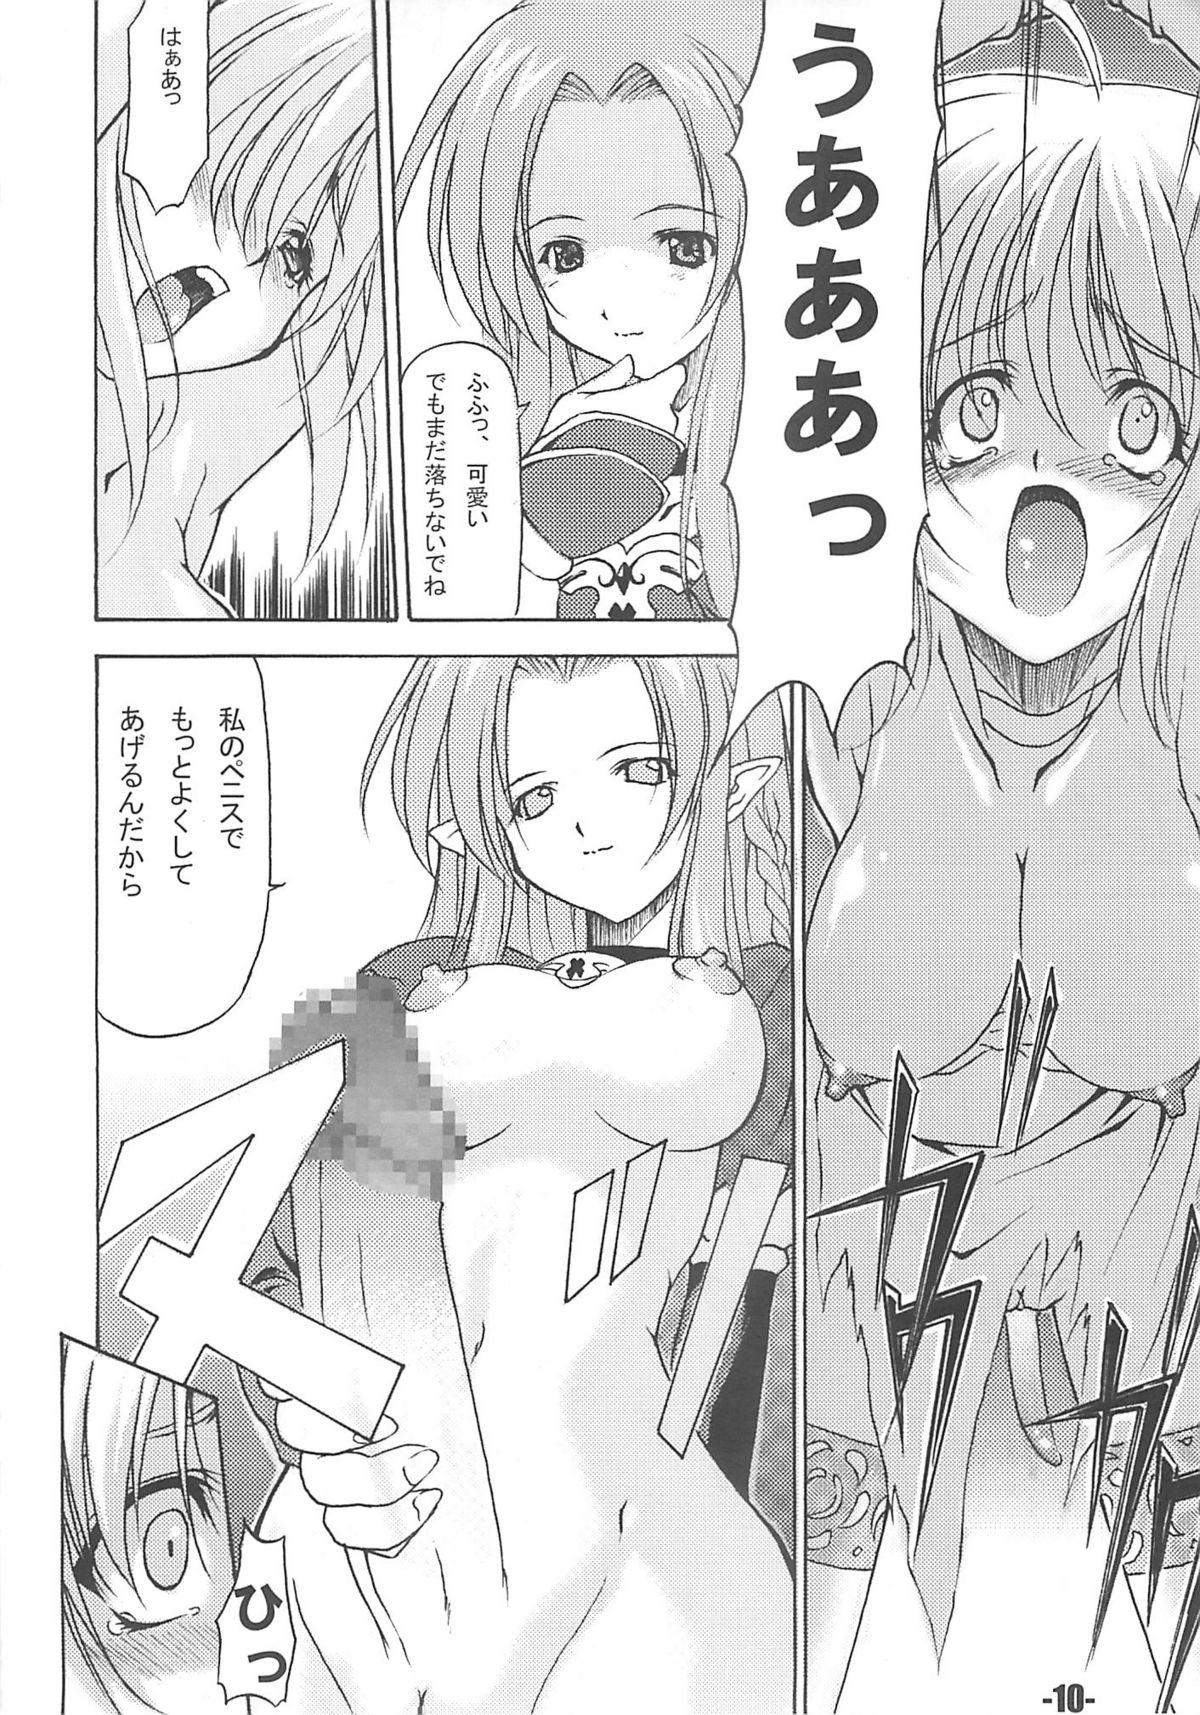 Hardsex EXtra stage vol. 13 - Fate stay night Chibola - Page 9